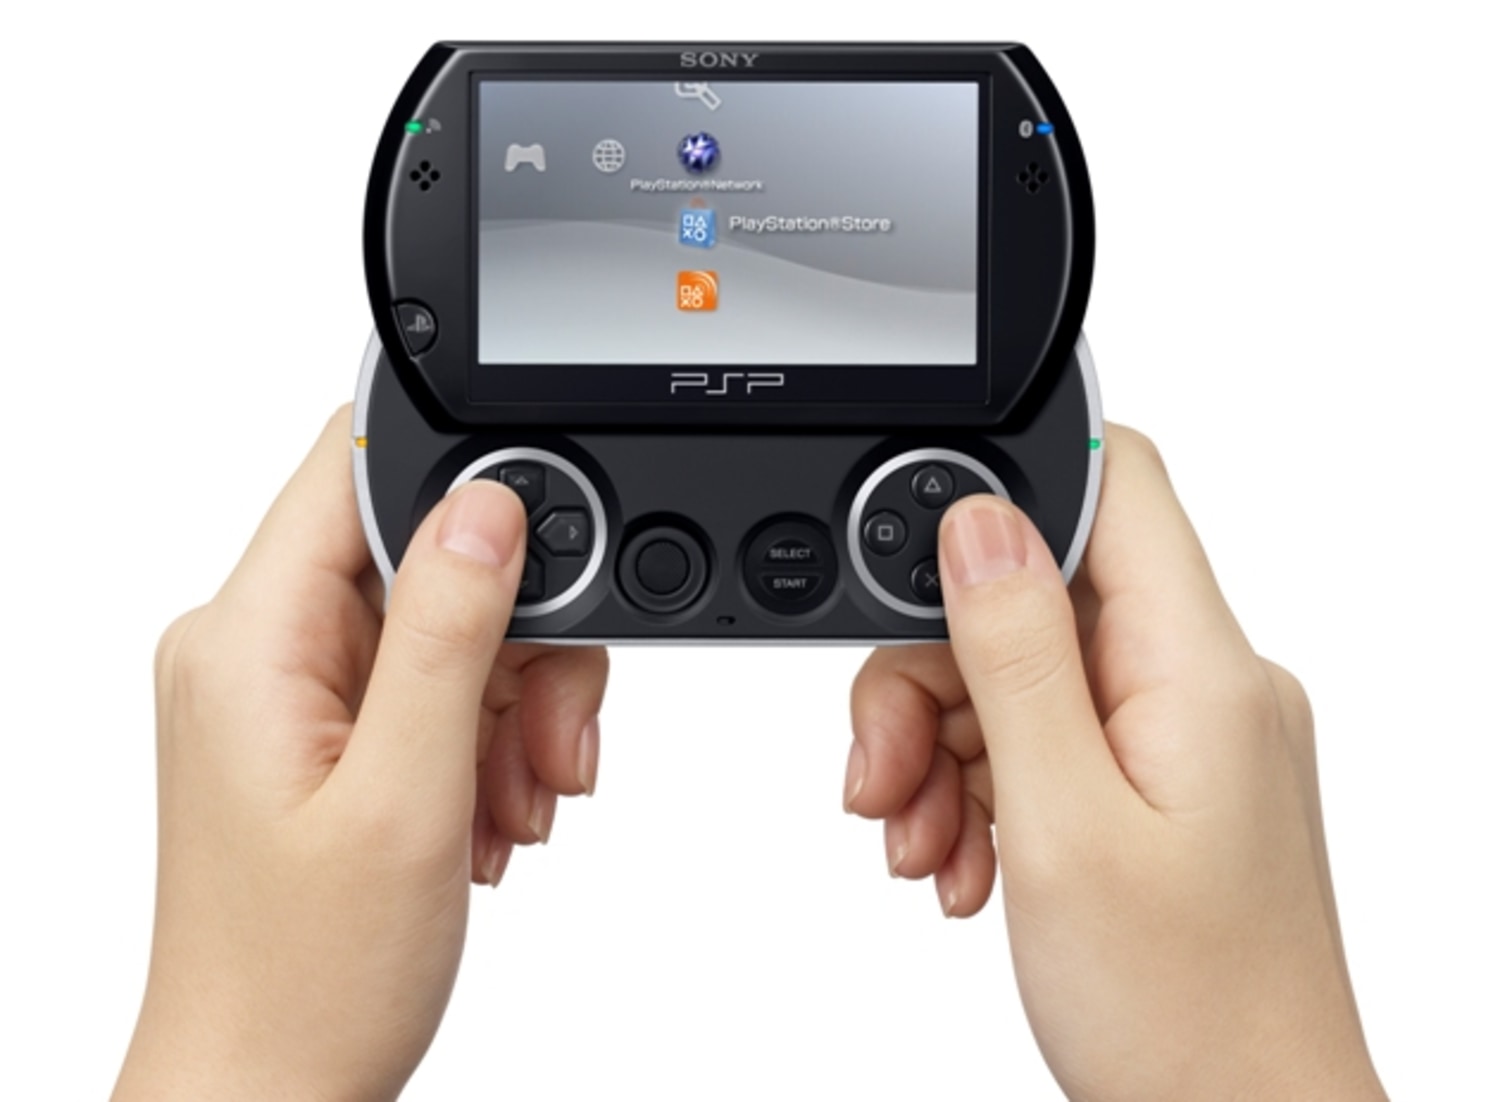 Best PSP Games: These 20 PlayStation Portable Games Remain Great